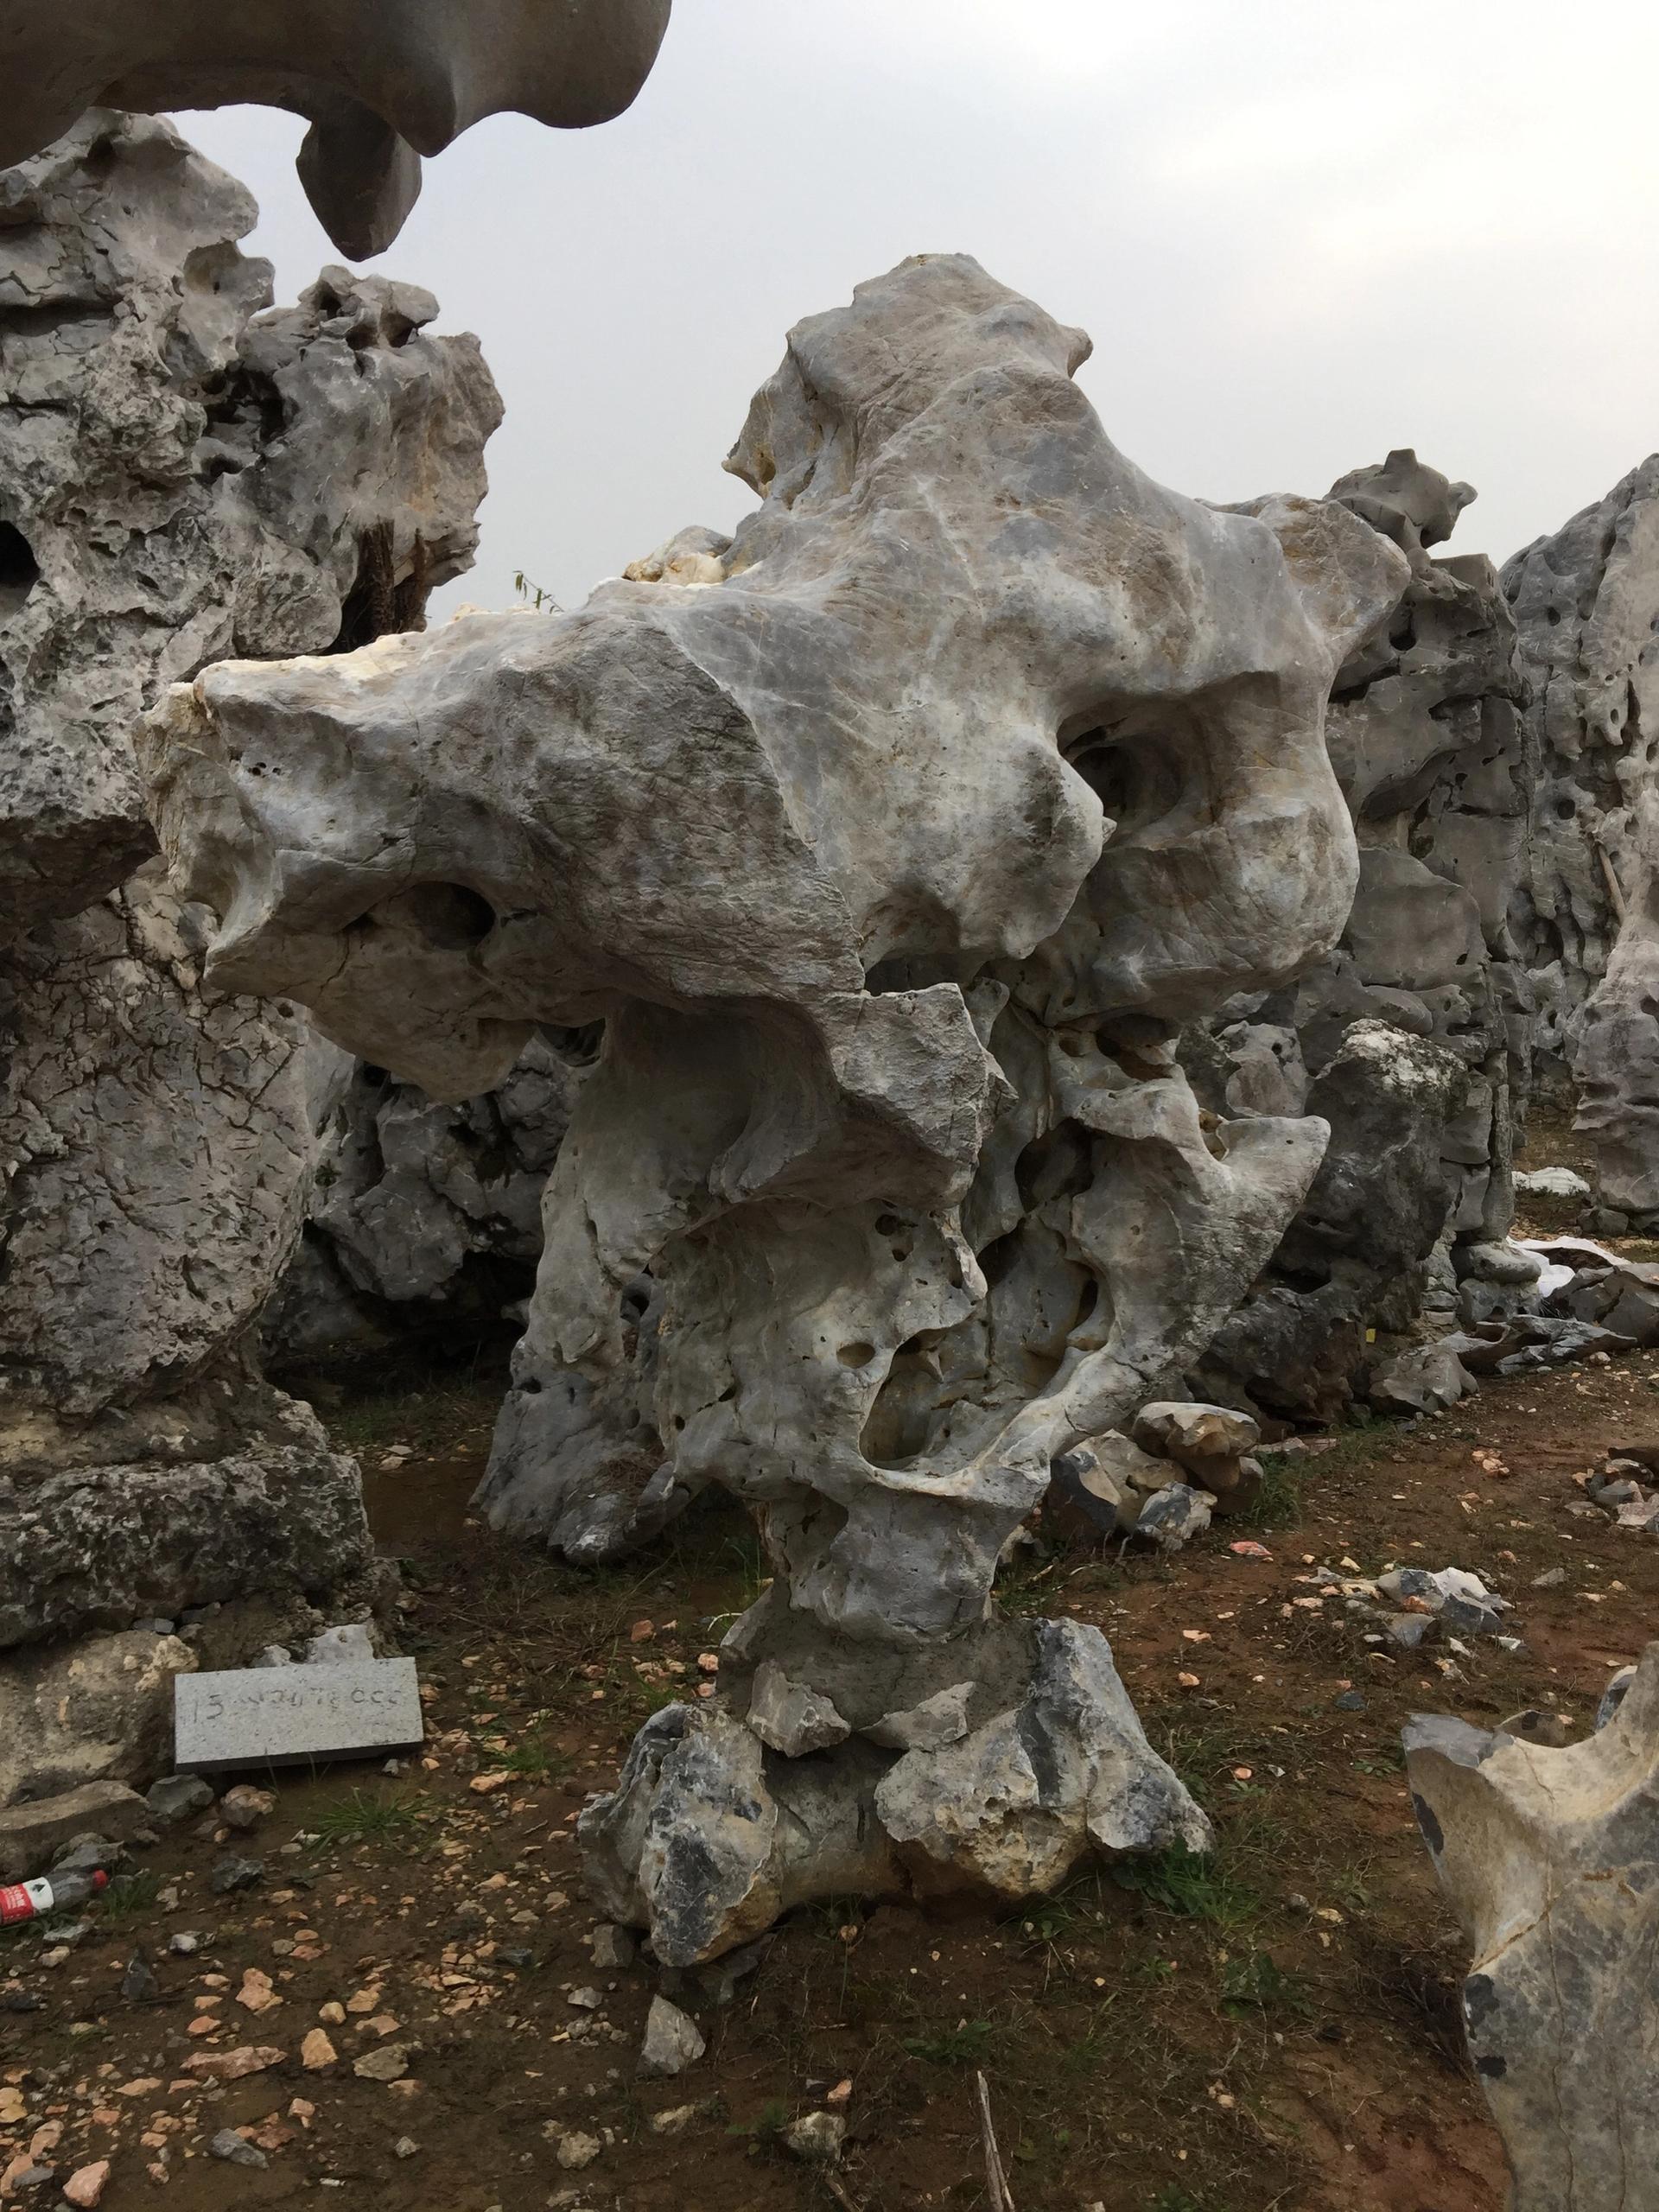 San Antonio’s rock is 12 feet tall and 8 feet wide, mostly gray with lighter veins, and shaped like an inverted triangle Courtesy of the San Antonio Museum of Art